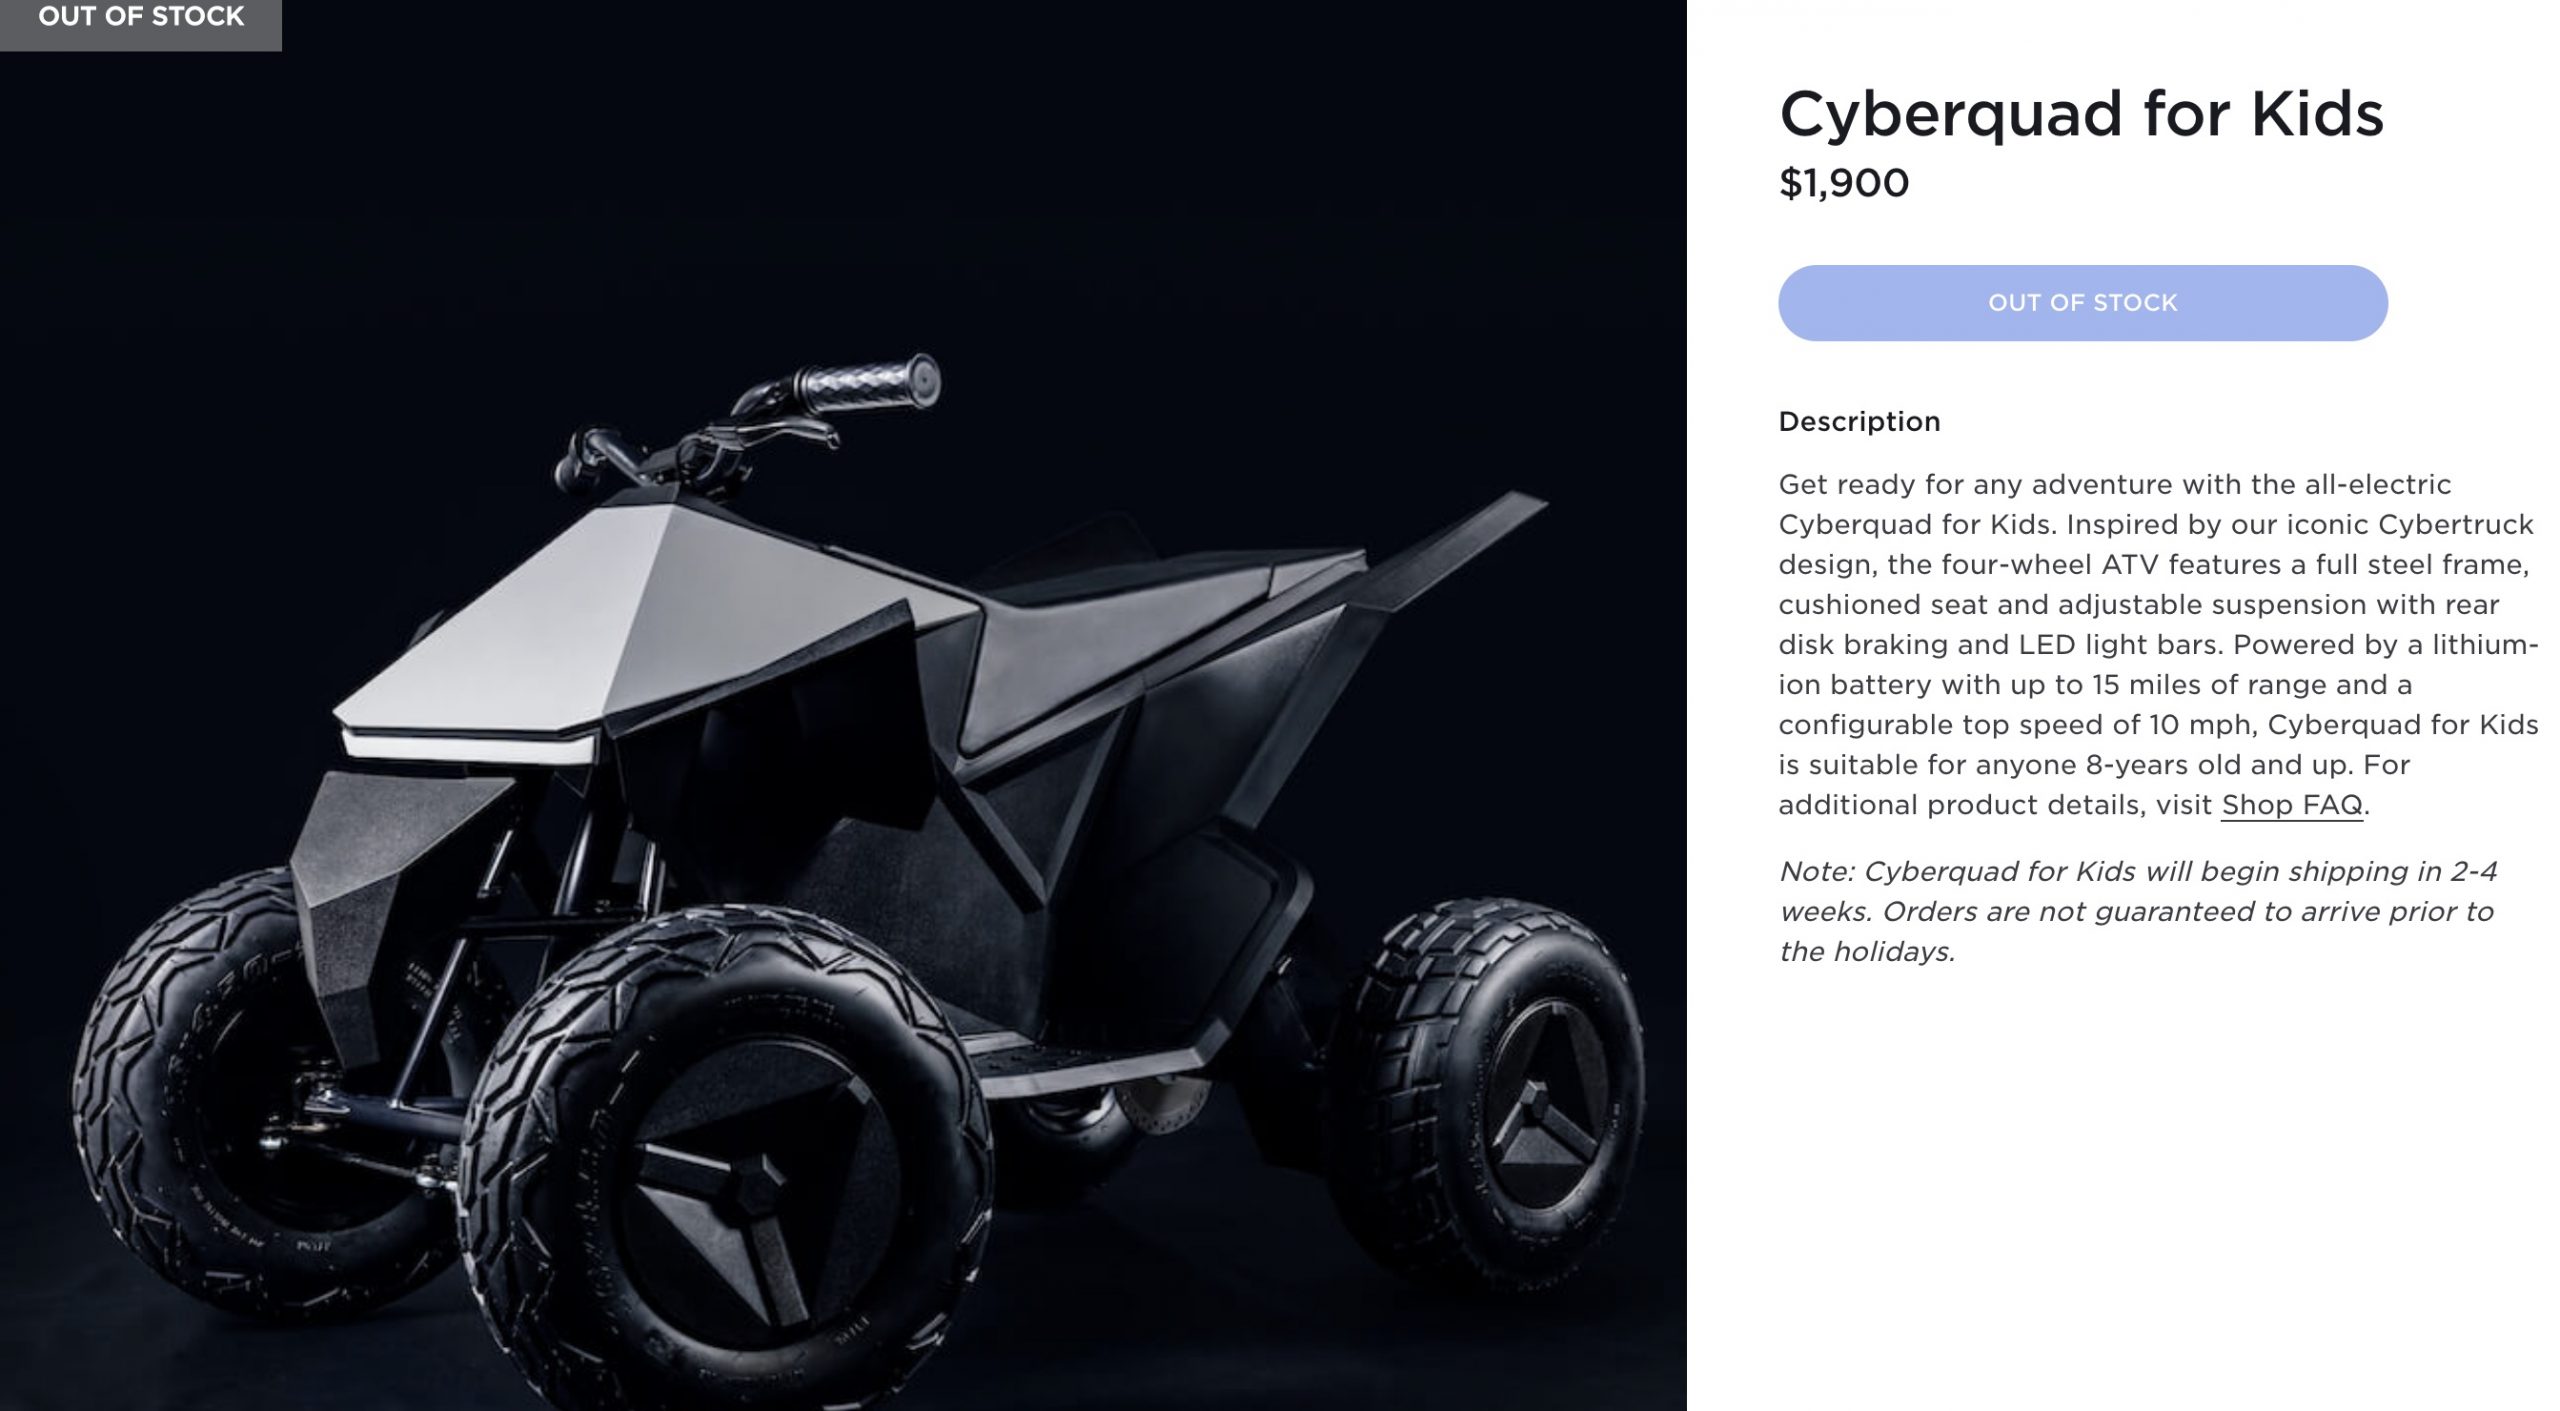 tesla-cyberquad-for-kids-sold-out